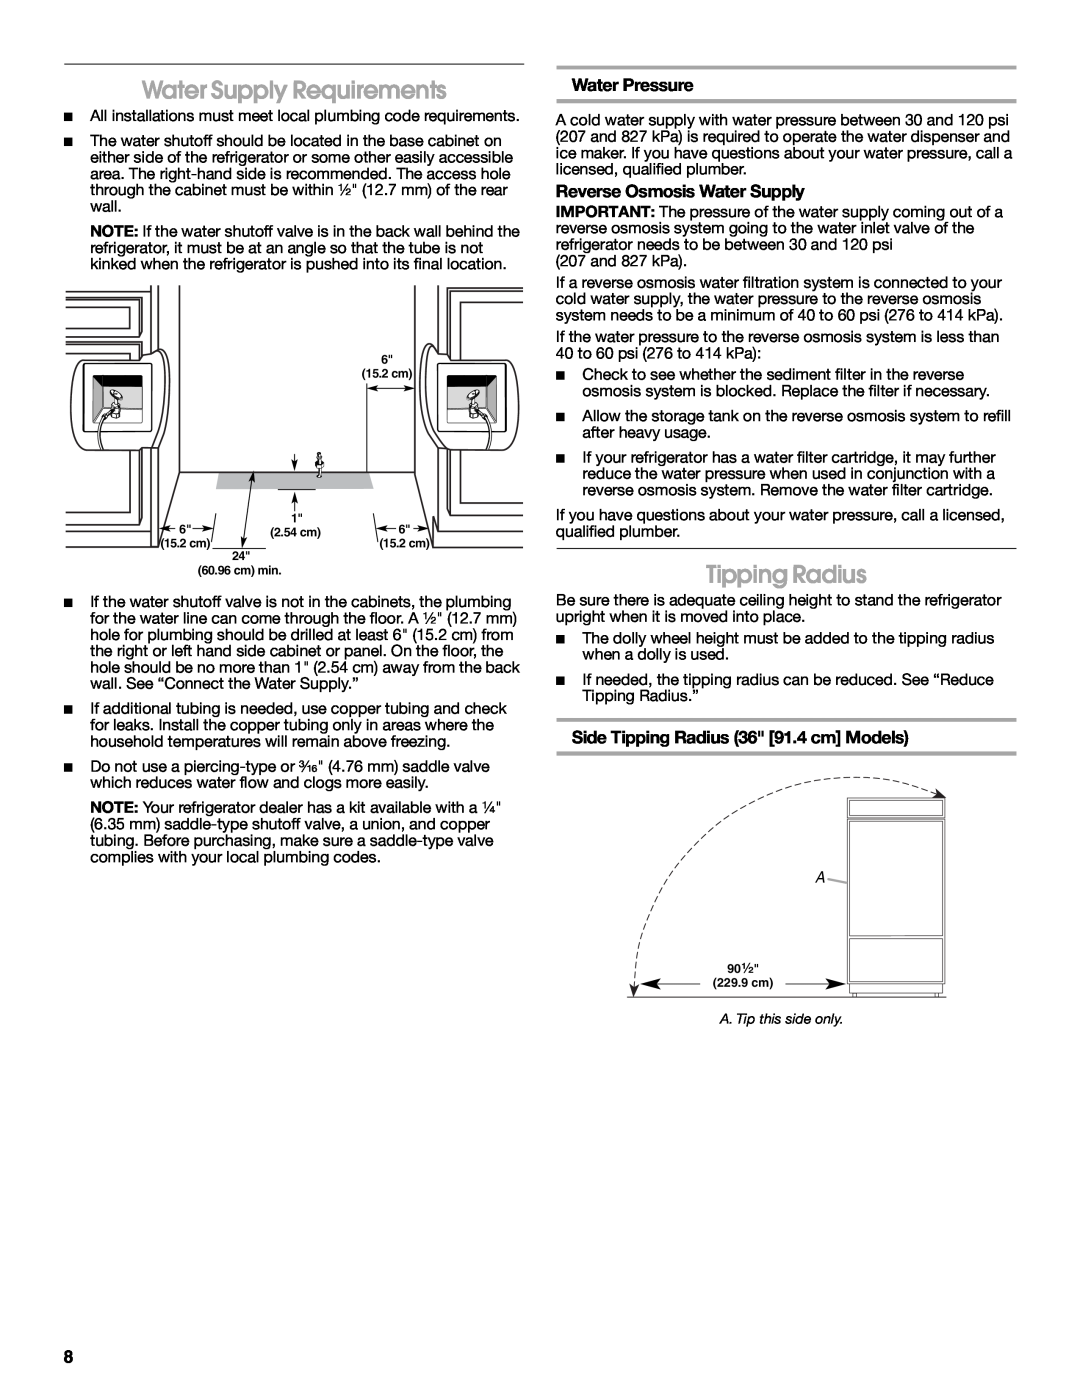 Jenn-Air W10183782A manual Water Supply Requirements, Tipping Radius, Water Pressure, Reverse Osmosis Water Supply 